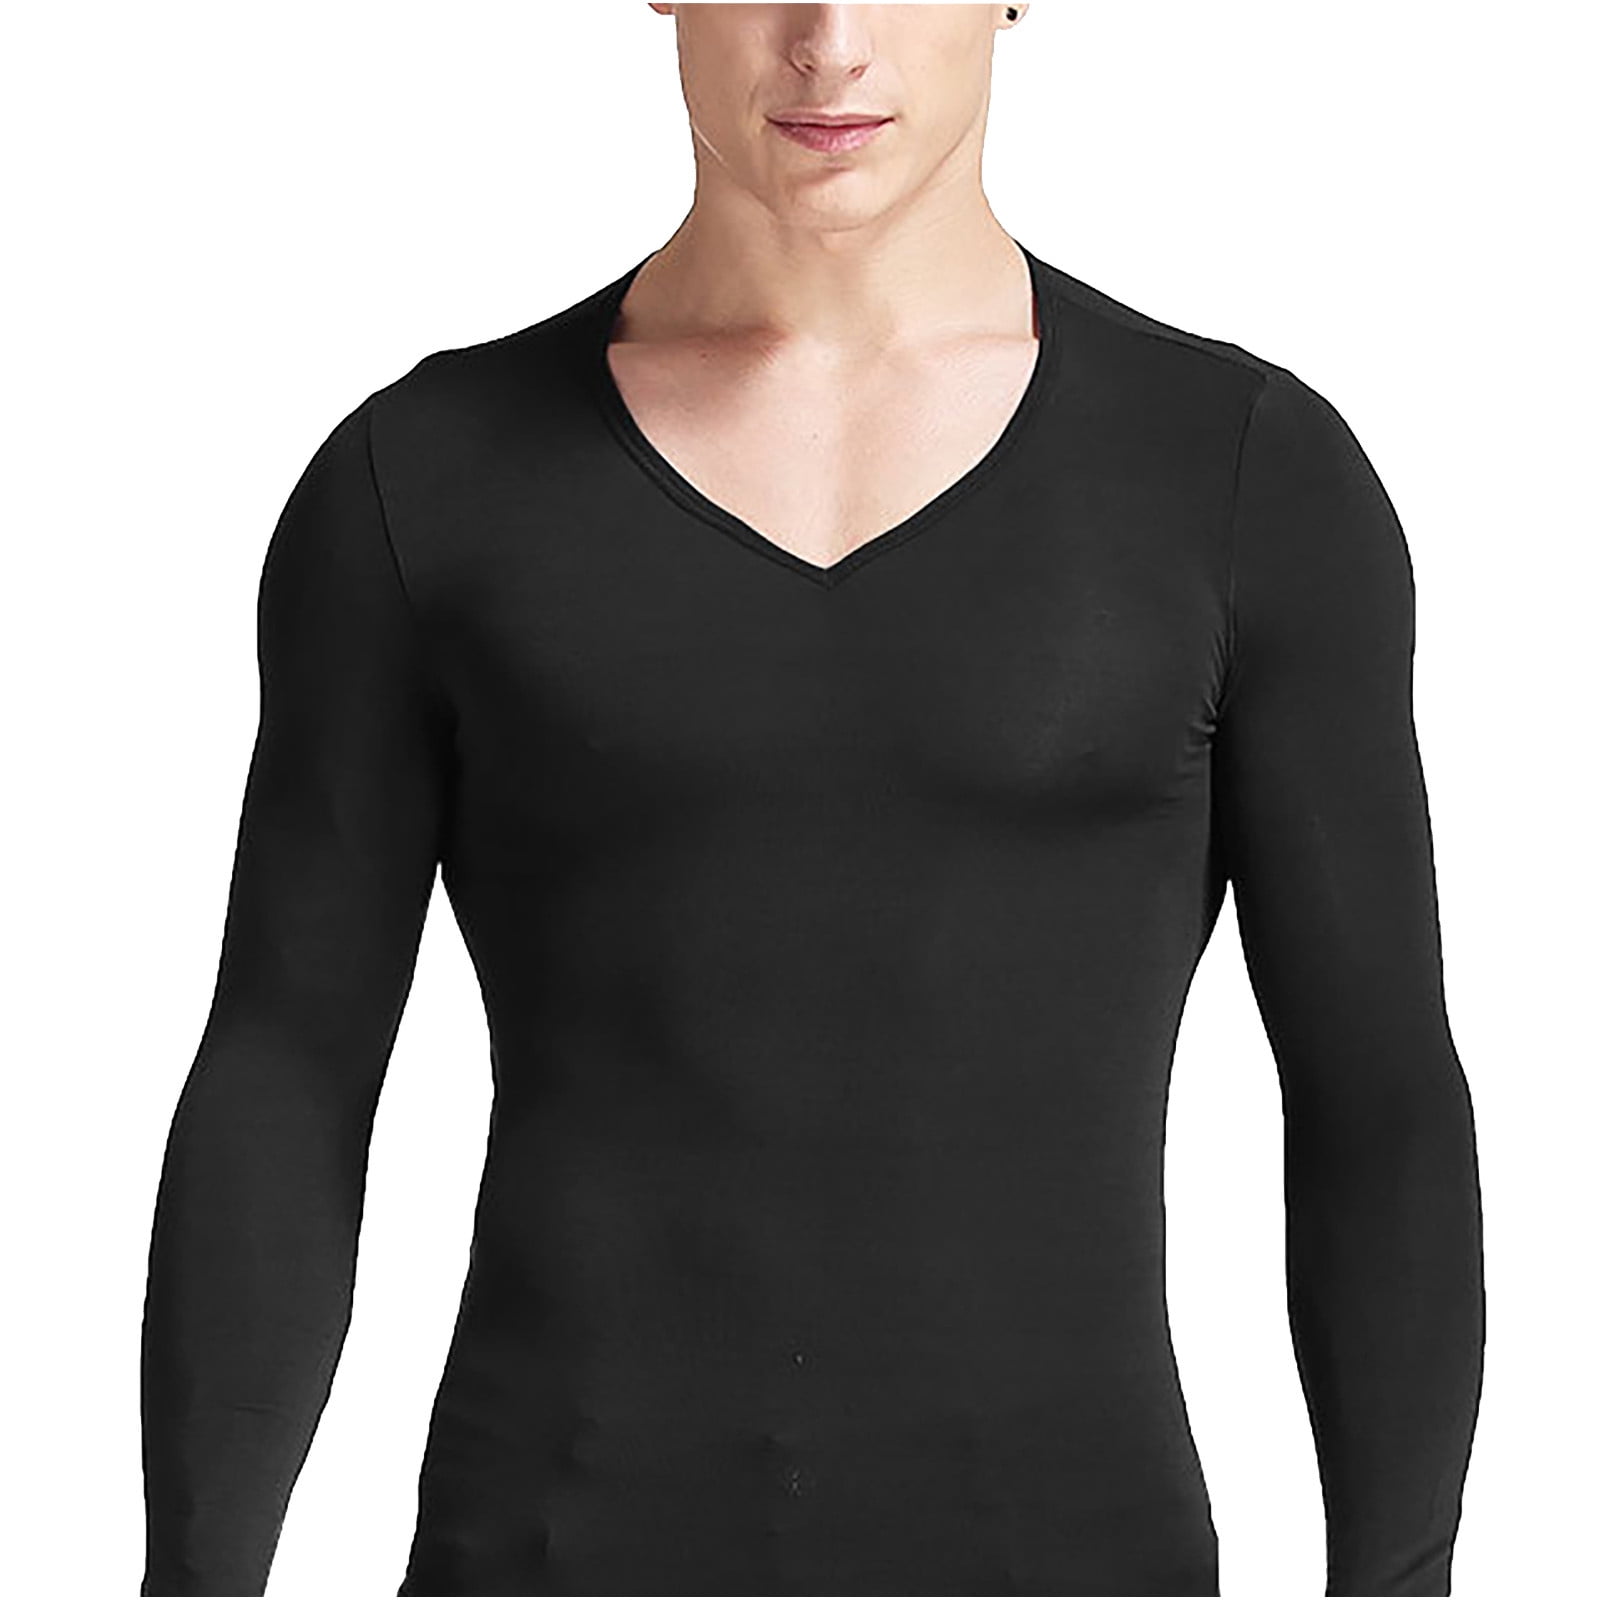 Simplmasygenix Men's Dry-Fit Moisture Wicking Performance Long Sleeve T- Shirt, Clearance Slim Thin Thermal Underwear Men's V Neck Autumn Clothes  Breathable Basic Bottoming Shirt 